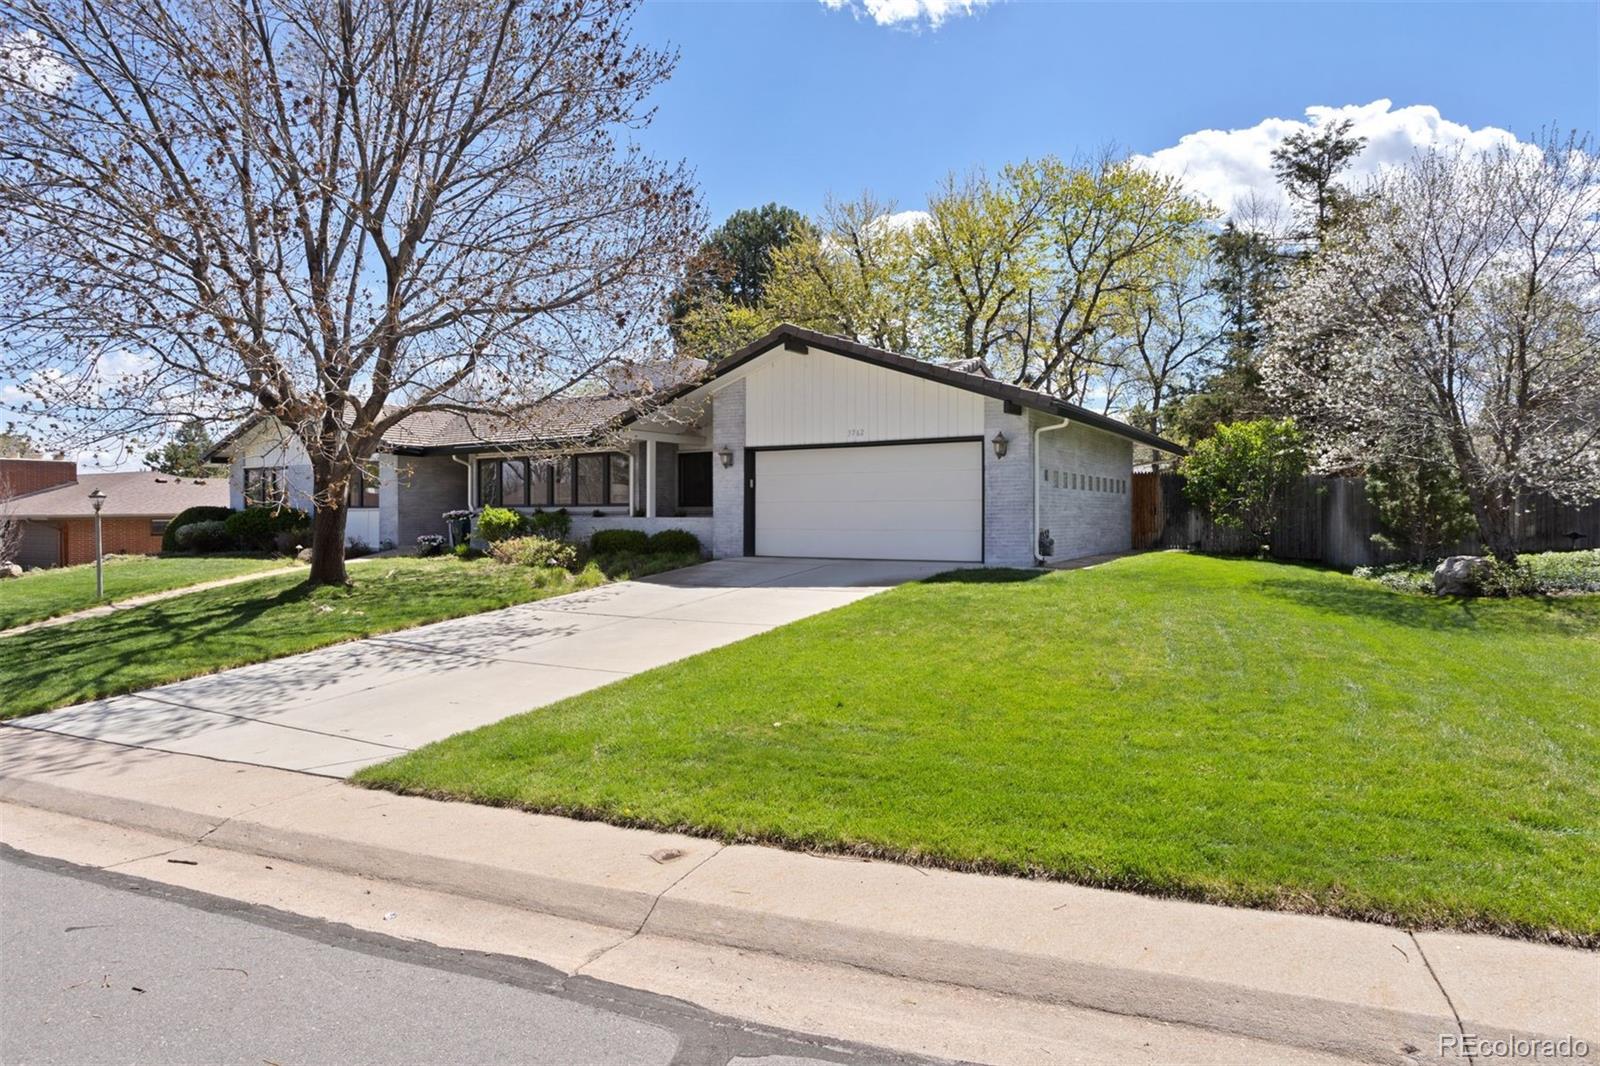 3762 s grape street, denver sold home. Closed on 2024-05-23 for $1,430,000.